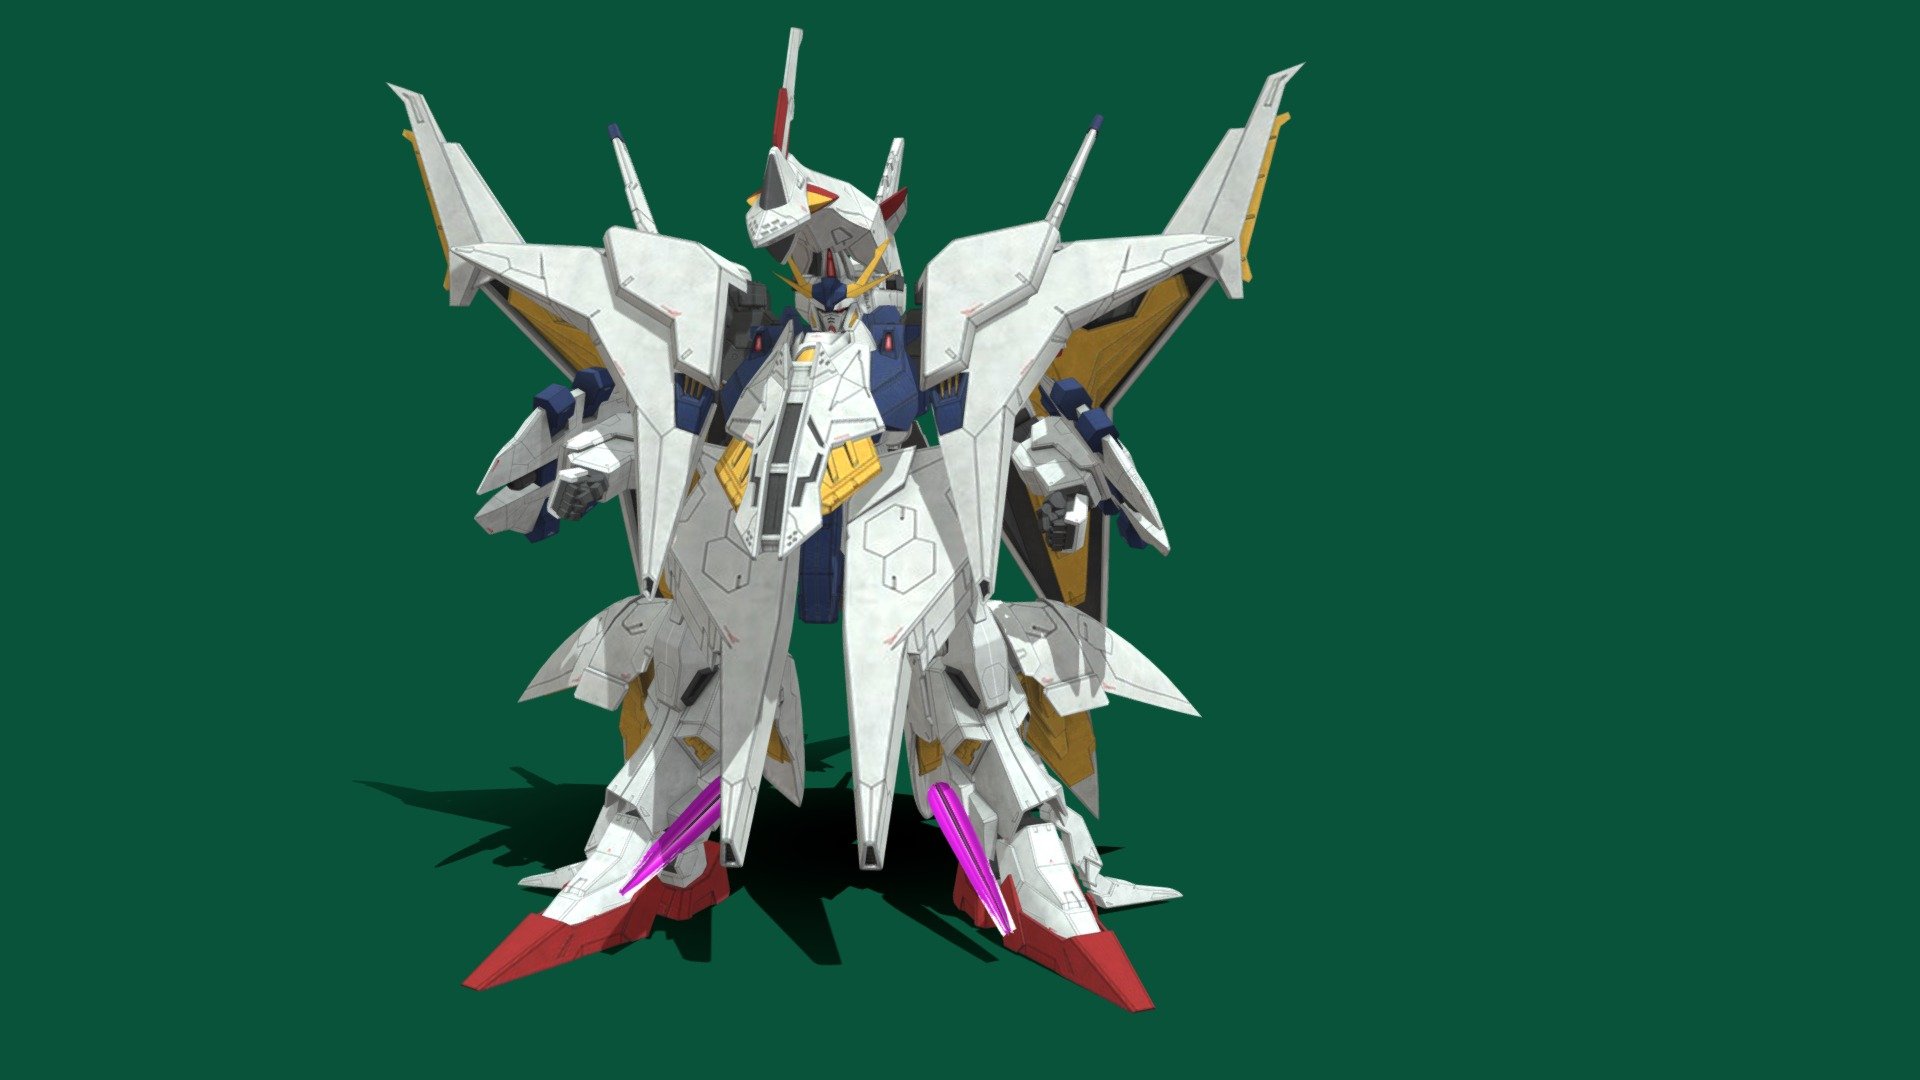 The RX-104FF Penelope is a prototype transformable Newtype-use mobile suit. It was featured in the novel Mobile Suit Gundam: Hathaway's Flash 3d model